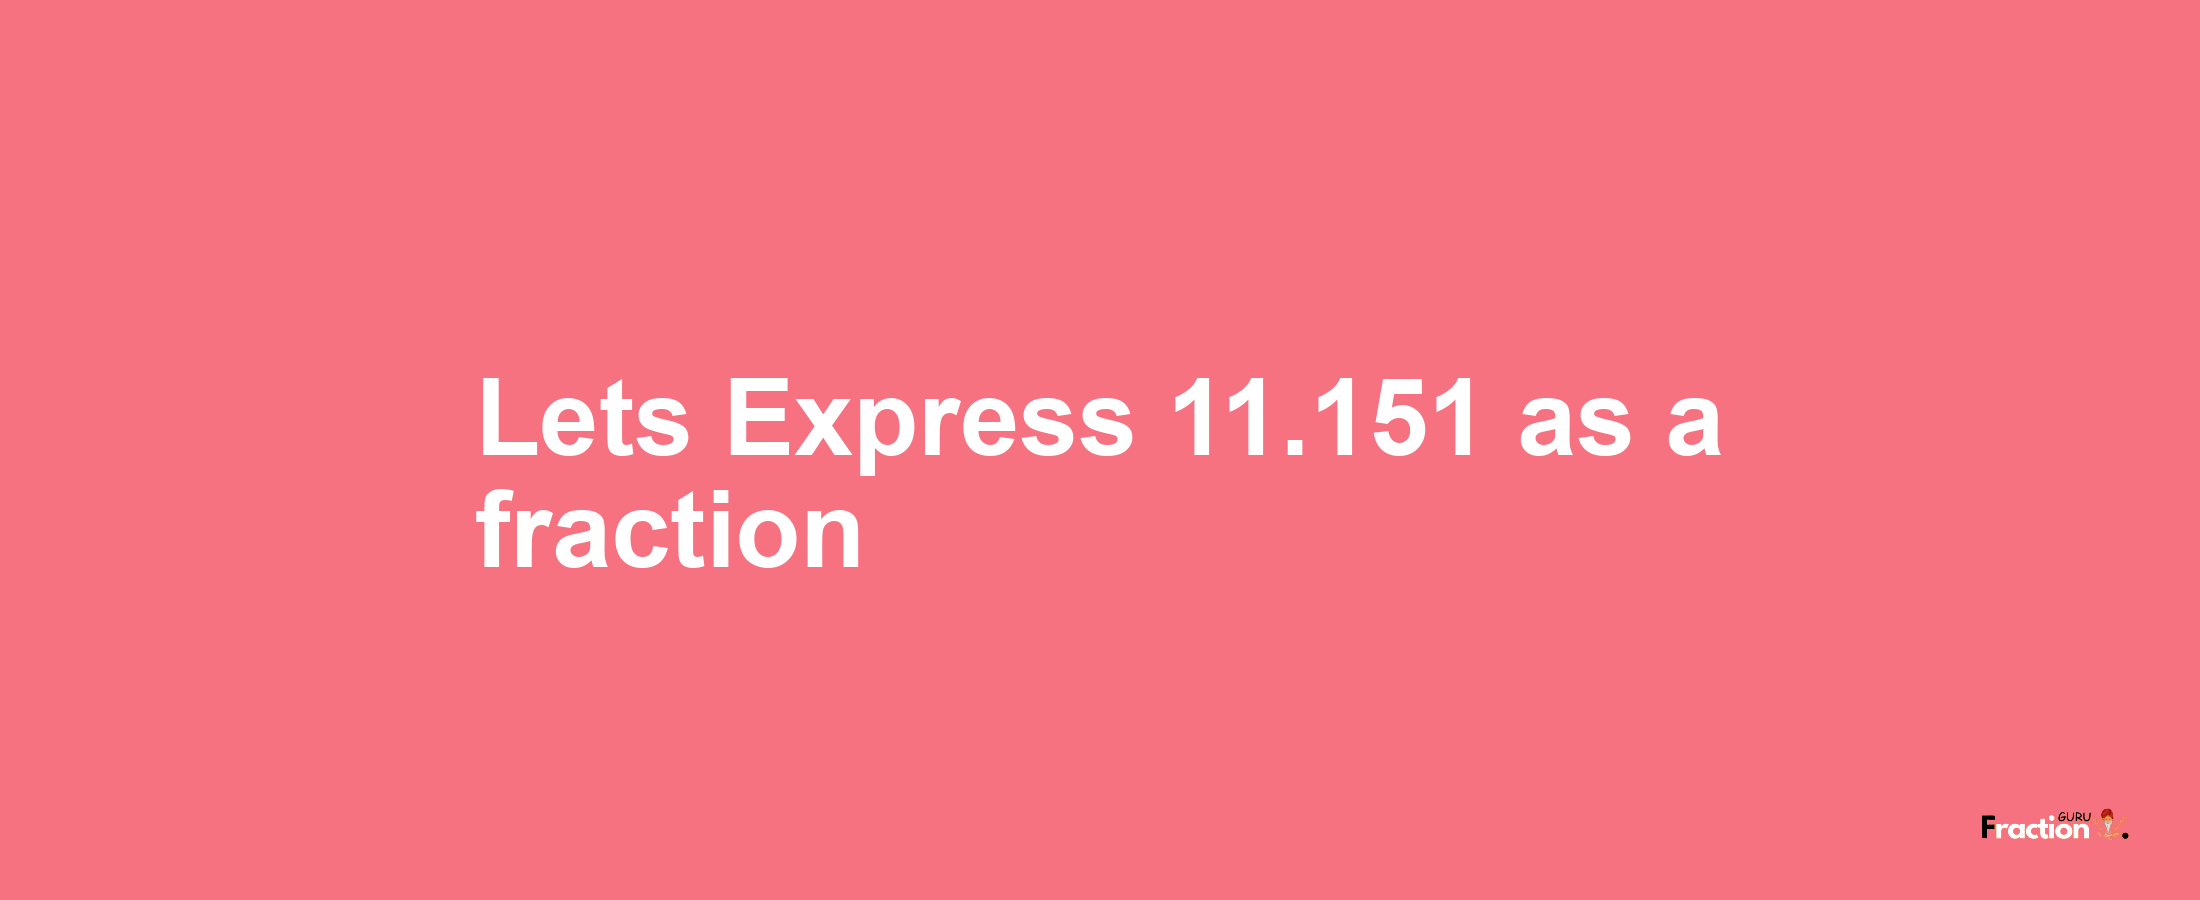 Lets Express 11.151 as afraction